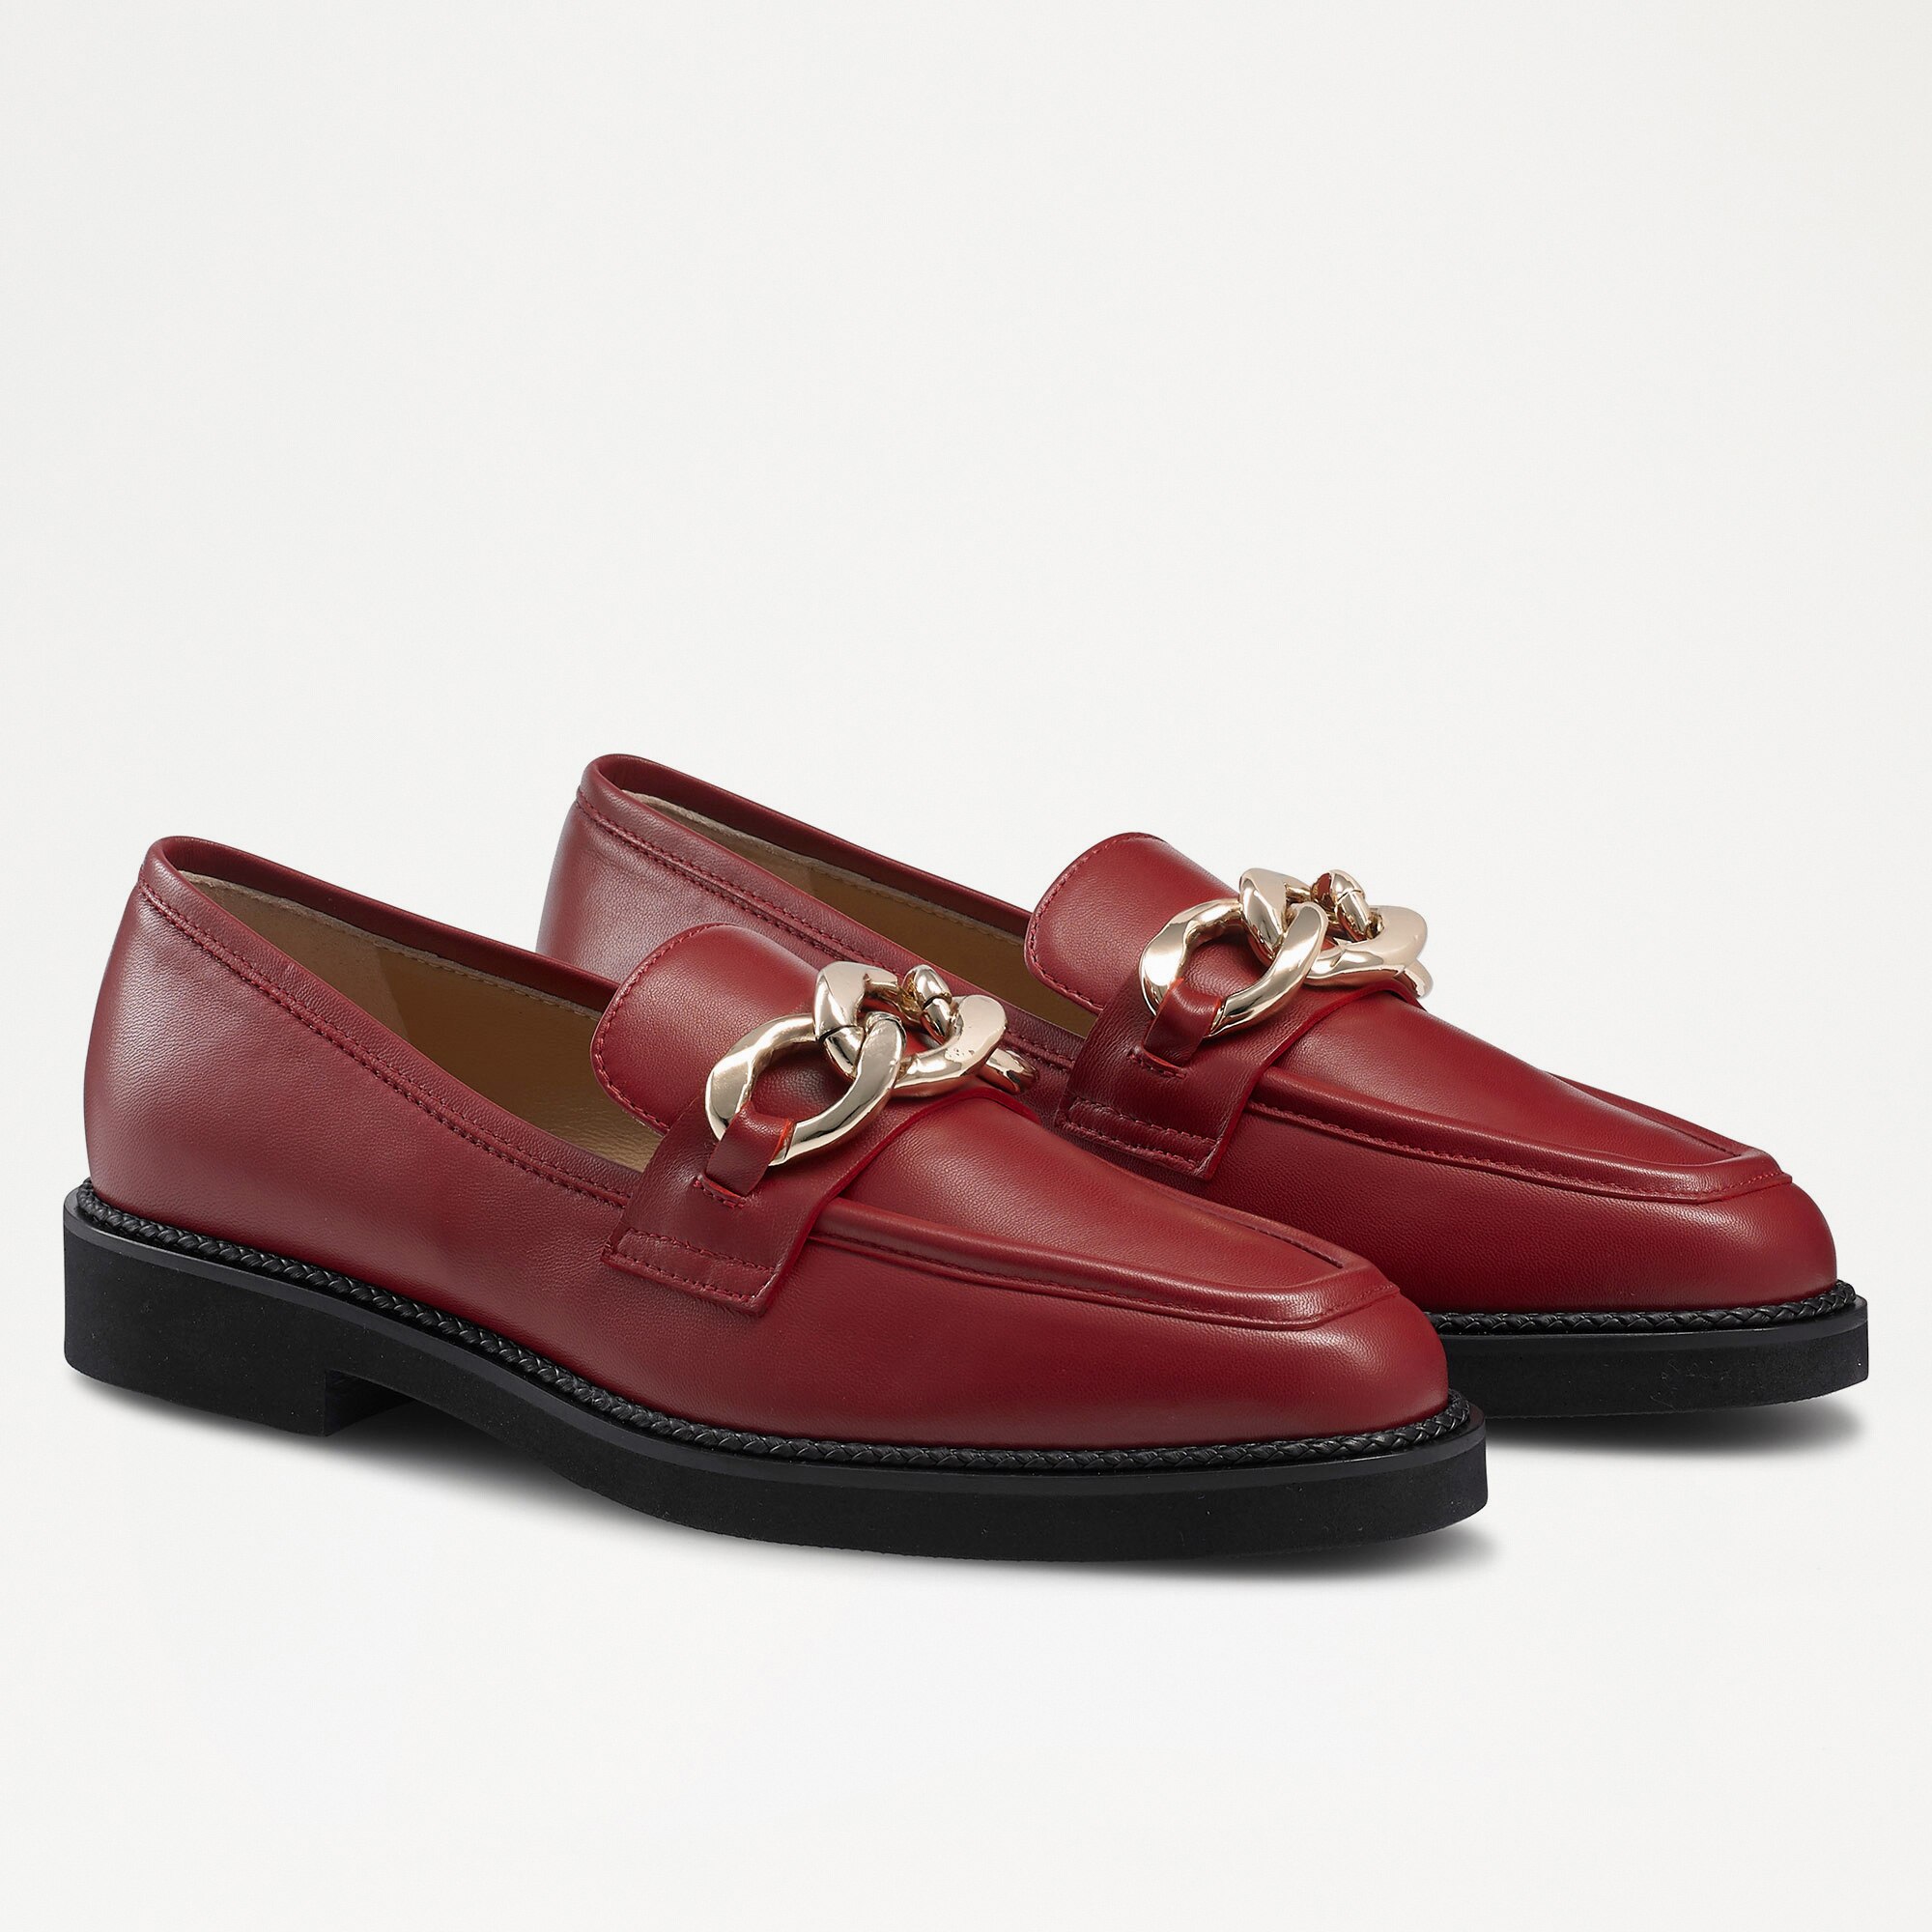 CLEOPATRA 3 Ring Loafer in Red Leather | Russell & Bromley